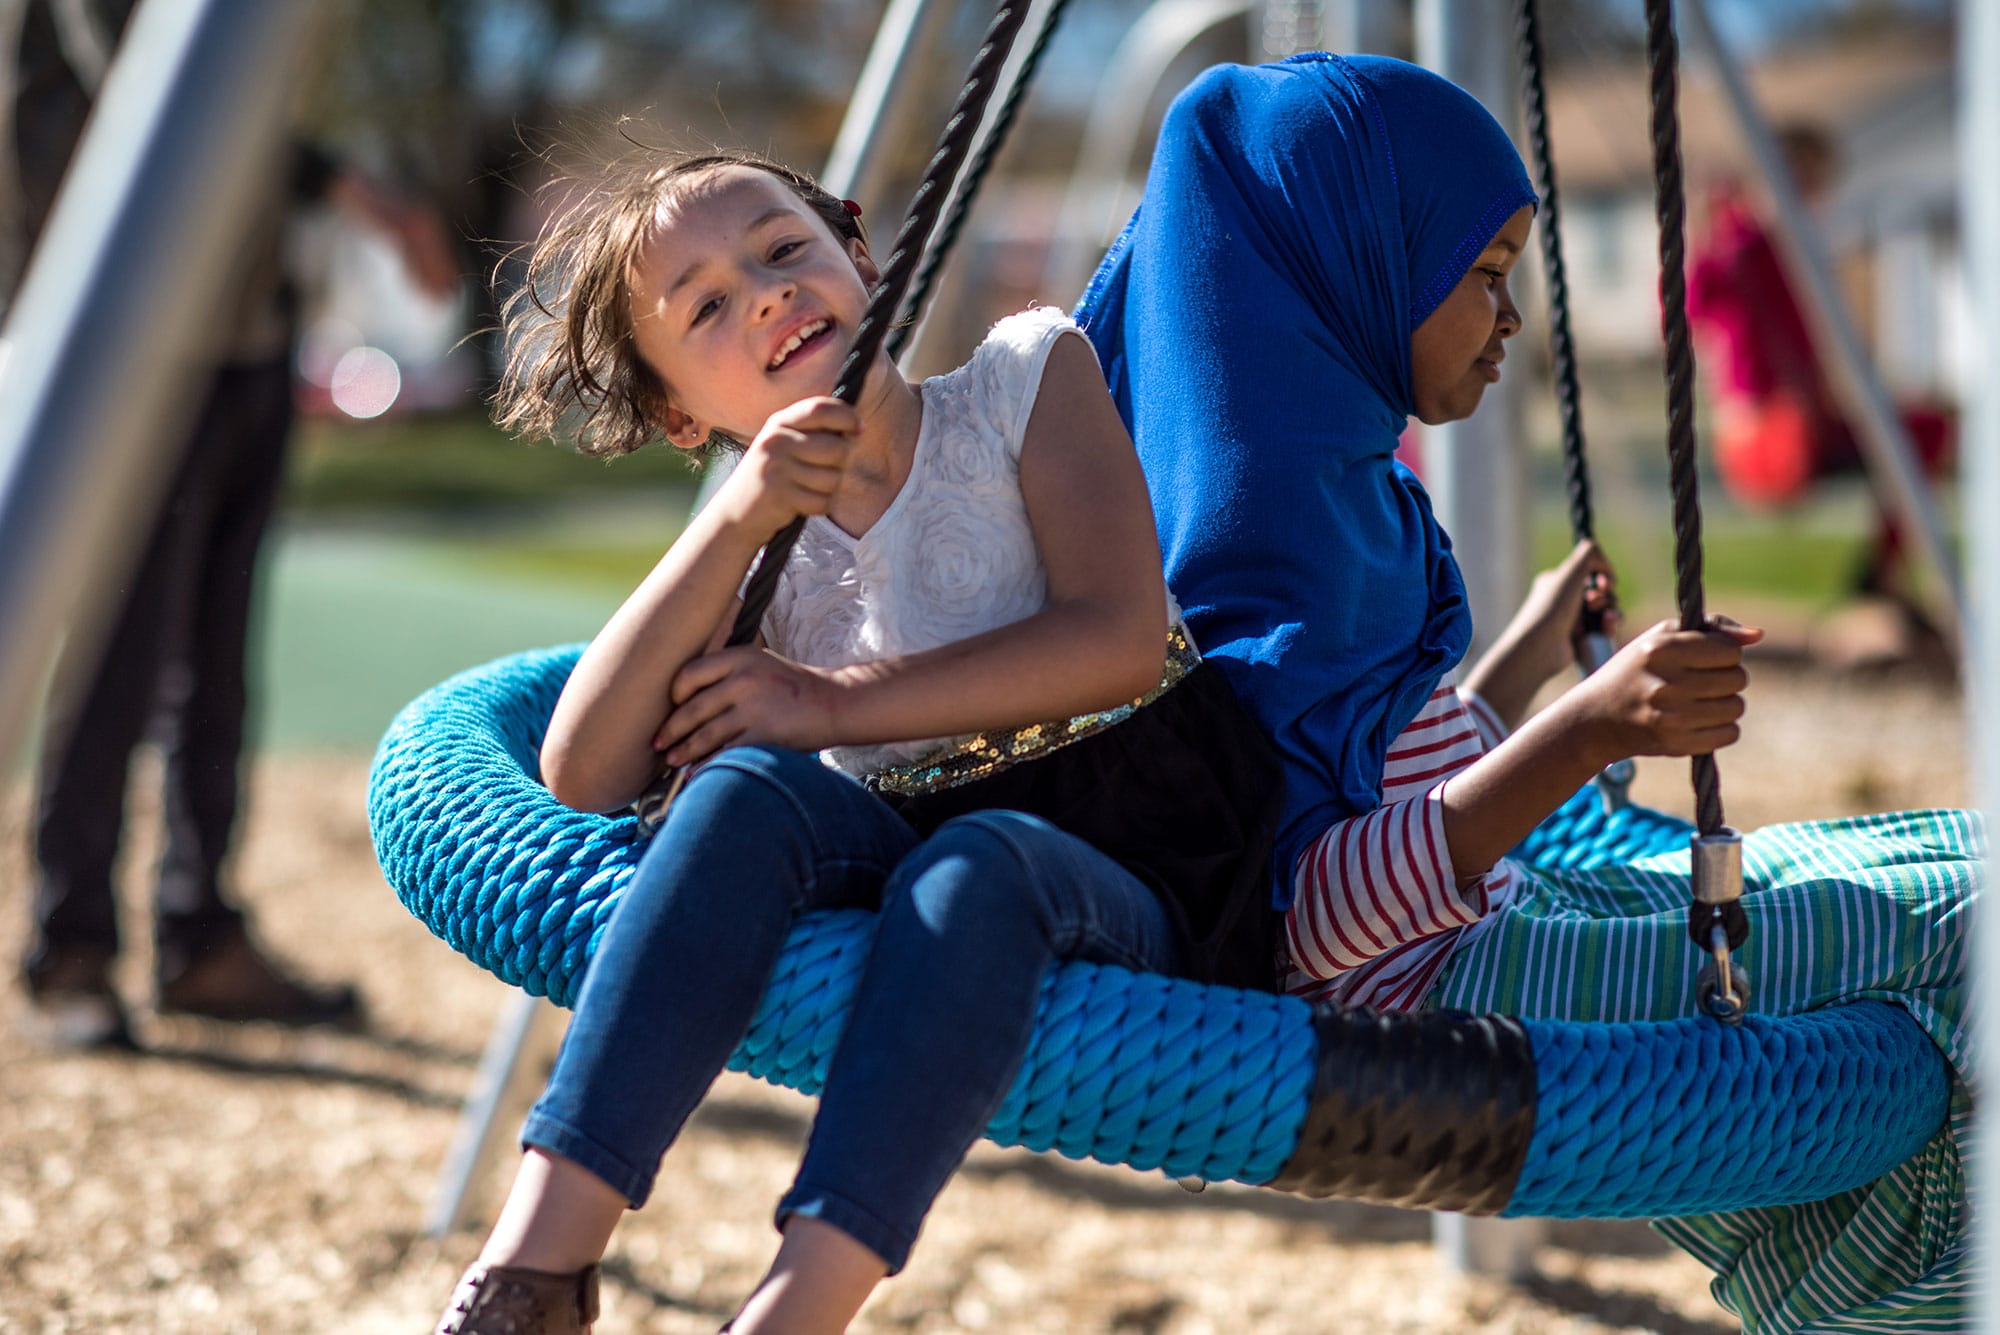 Two girls on a swing at a playground.